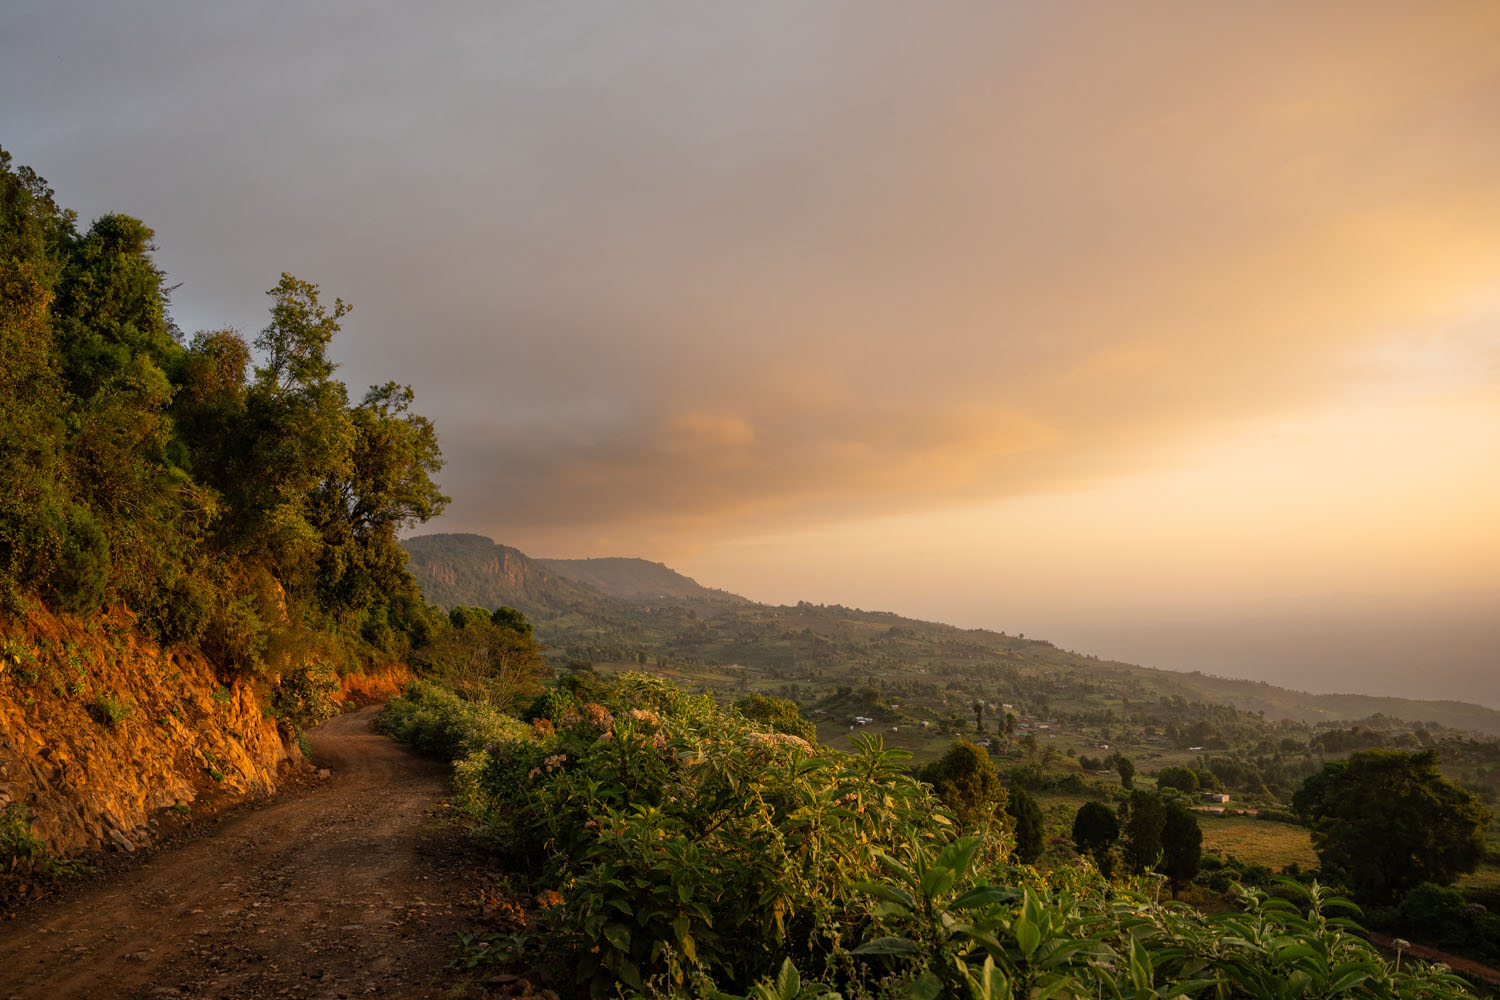 Clouds blanket the sky over the grassy hills of Rift Valley in Kenya. 